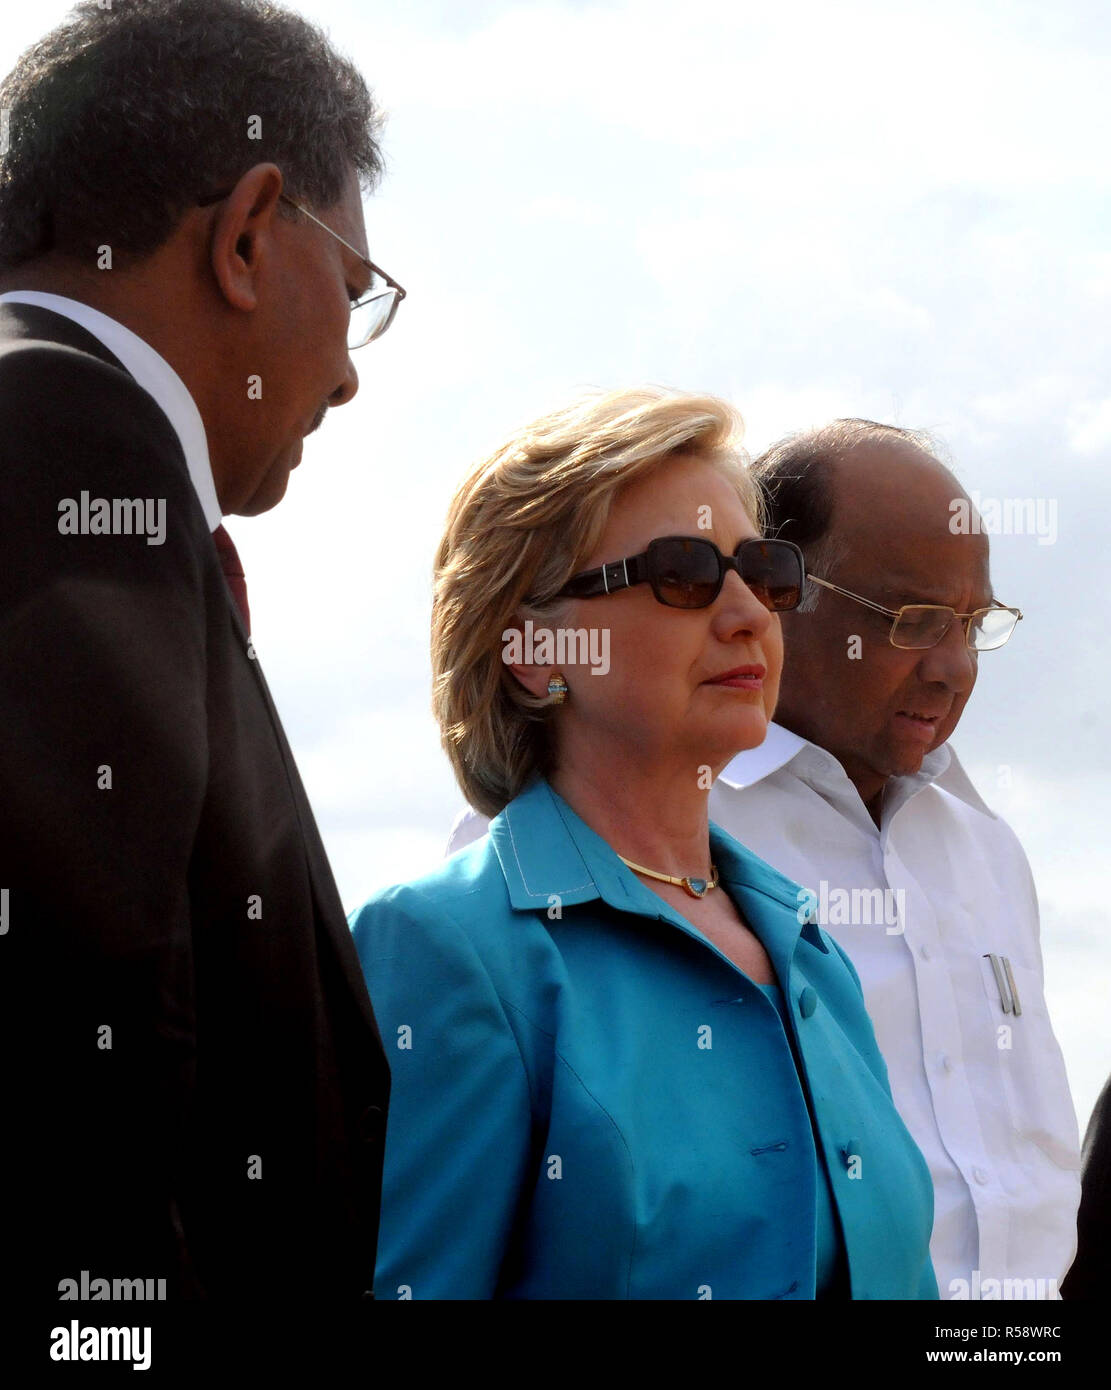 2009 - U.S. Secretary of State Hillary Rodham Clinton, with Sharad Pawar, Minister of Agriculture, Consumer Affairs, Food and Public Distribution (right), and Dr. Mangala Rai, President of the National Academy of Agricultural Sciences (left) Stock Photo